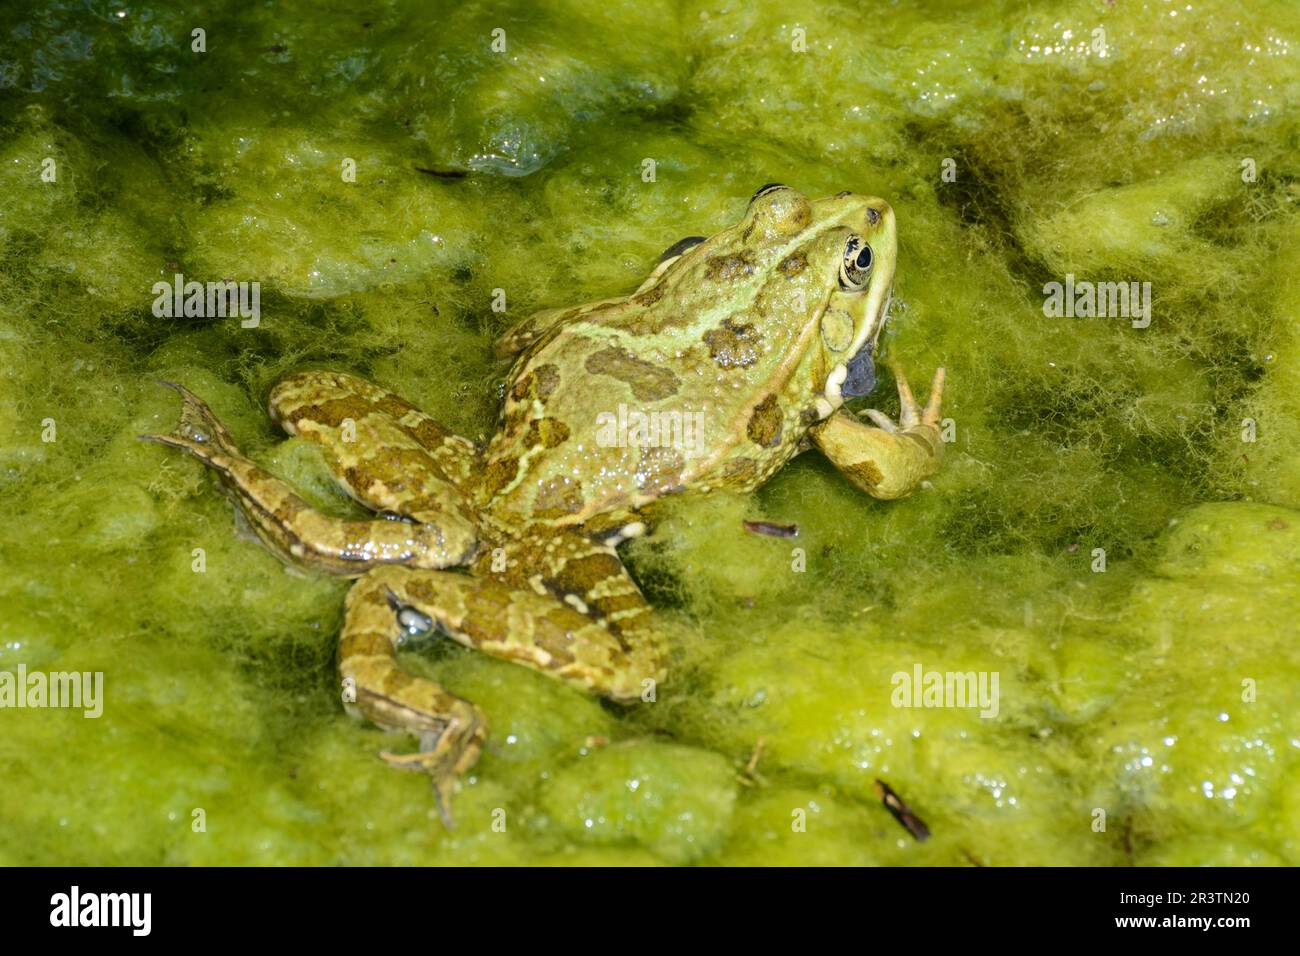 Croaking frog with swollen vocal sacs Stock Photo